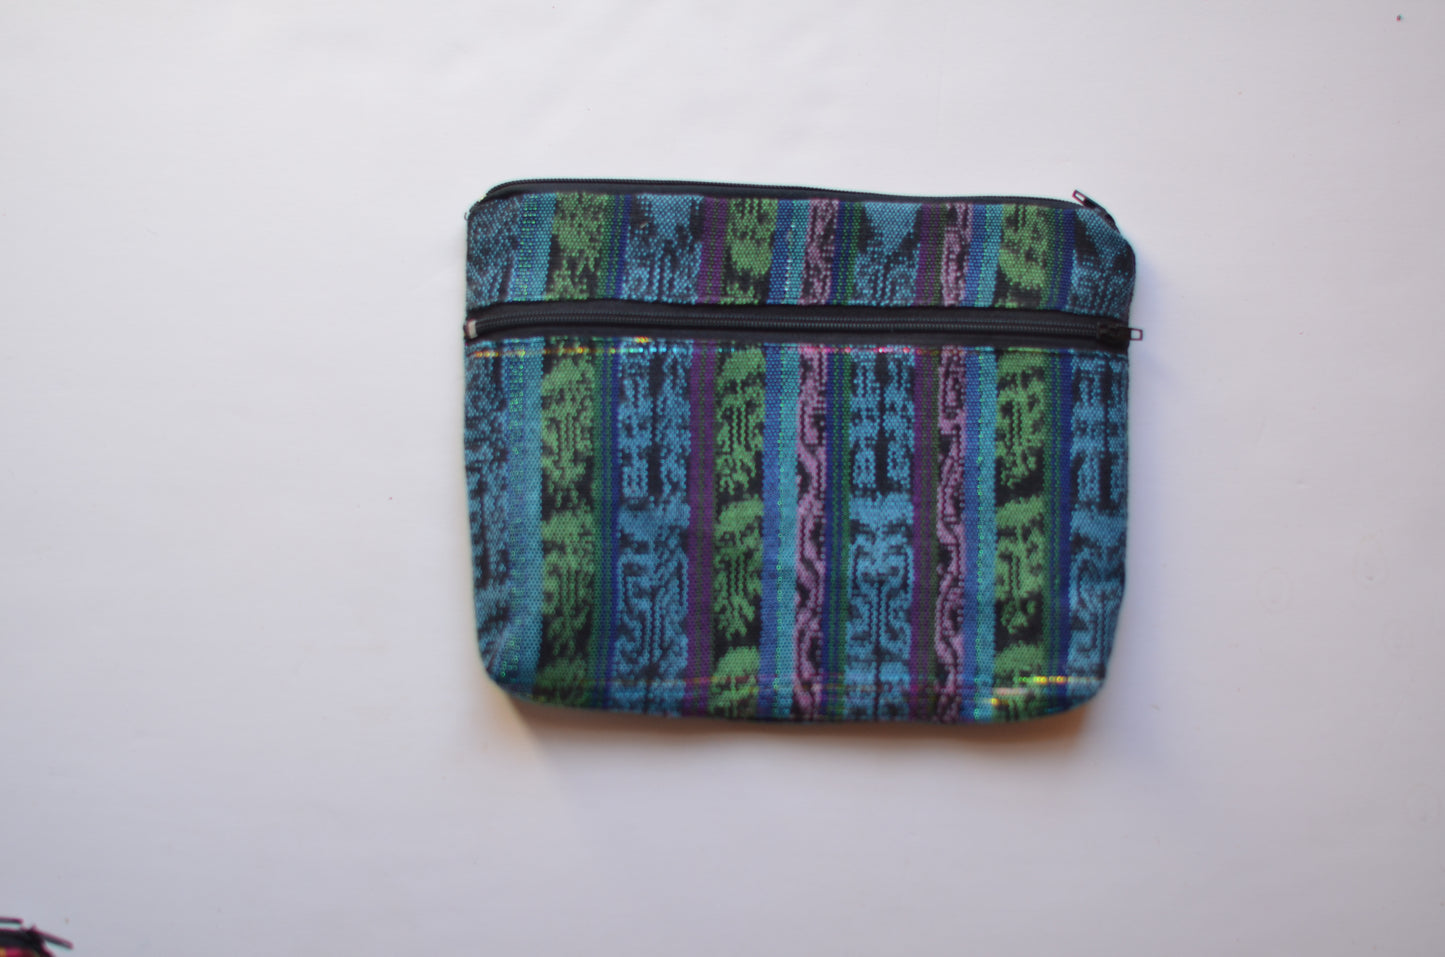 Blue Fair Trade Upcyced Large Coin Purse, Wallet, or Cosmetic Bag